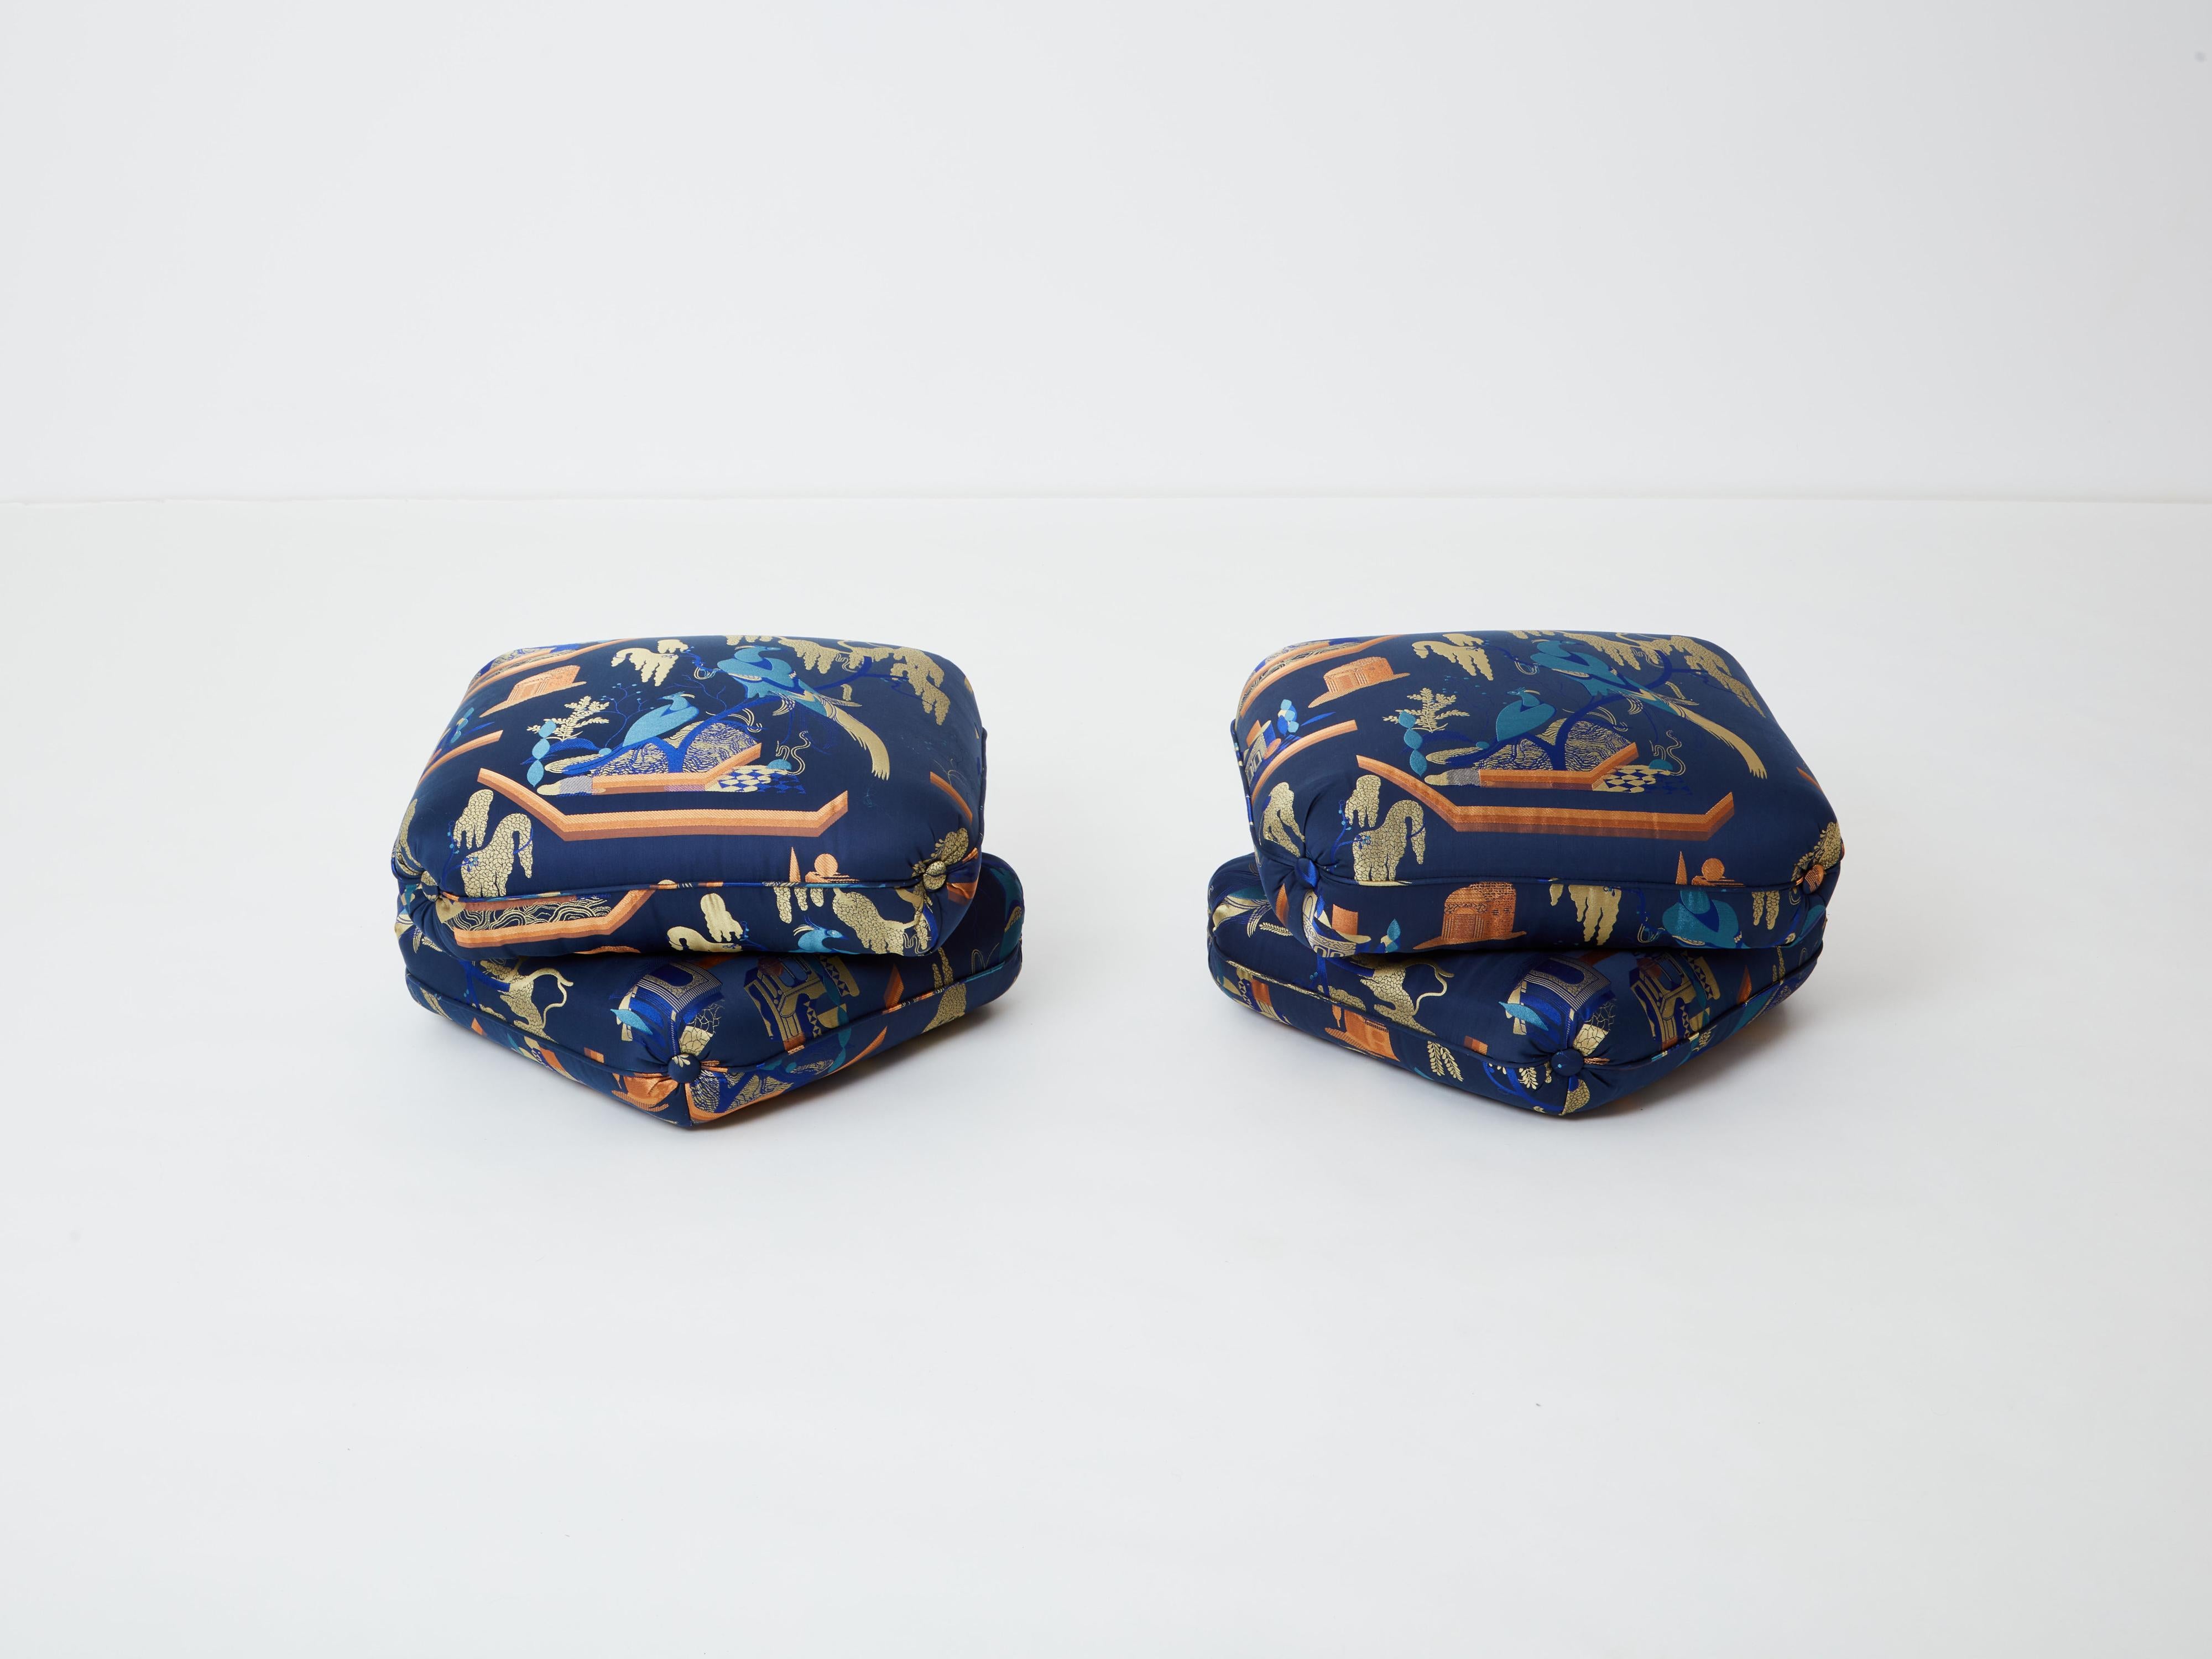 Beautiful pair of ottomans or stools by French Designer Jacques Charpentier for Maison Jansen designed in the 1970s. The stools ottomans are made of two large cushion elements connected together. They have been newly upholstered with a royal blue